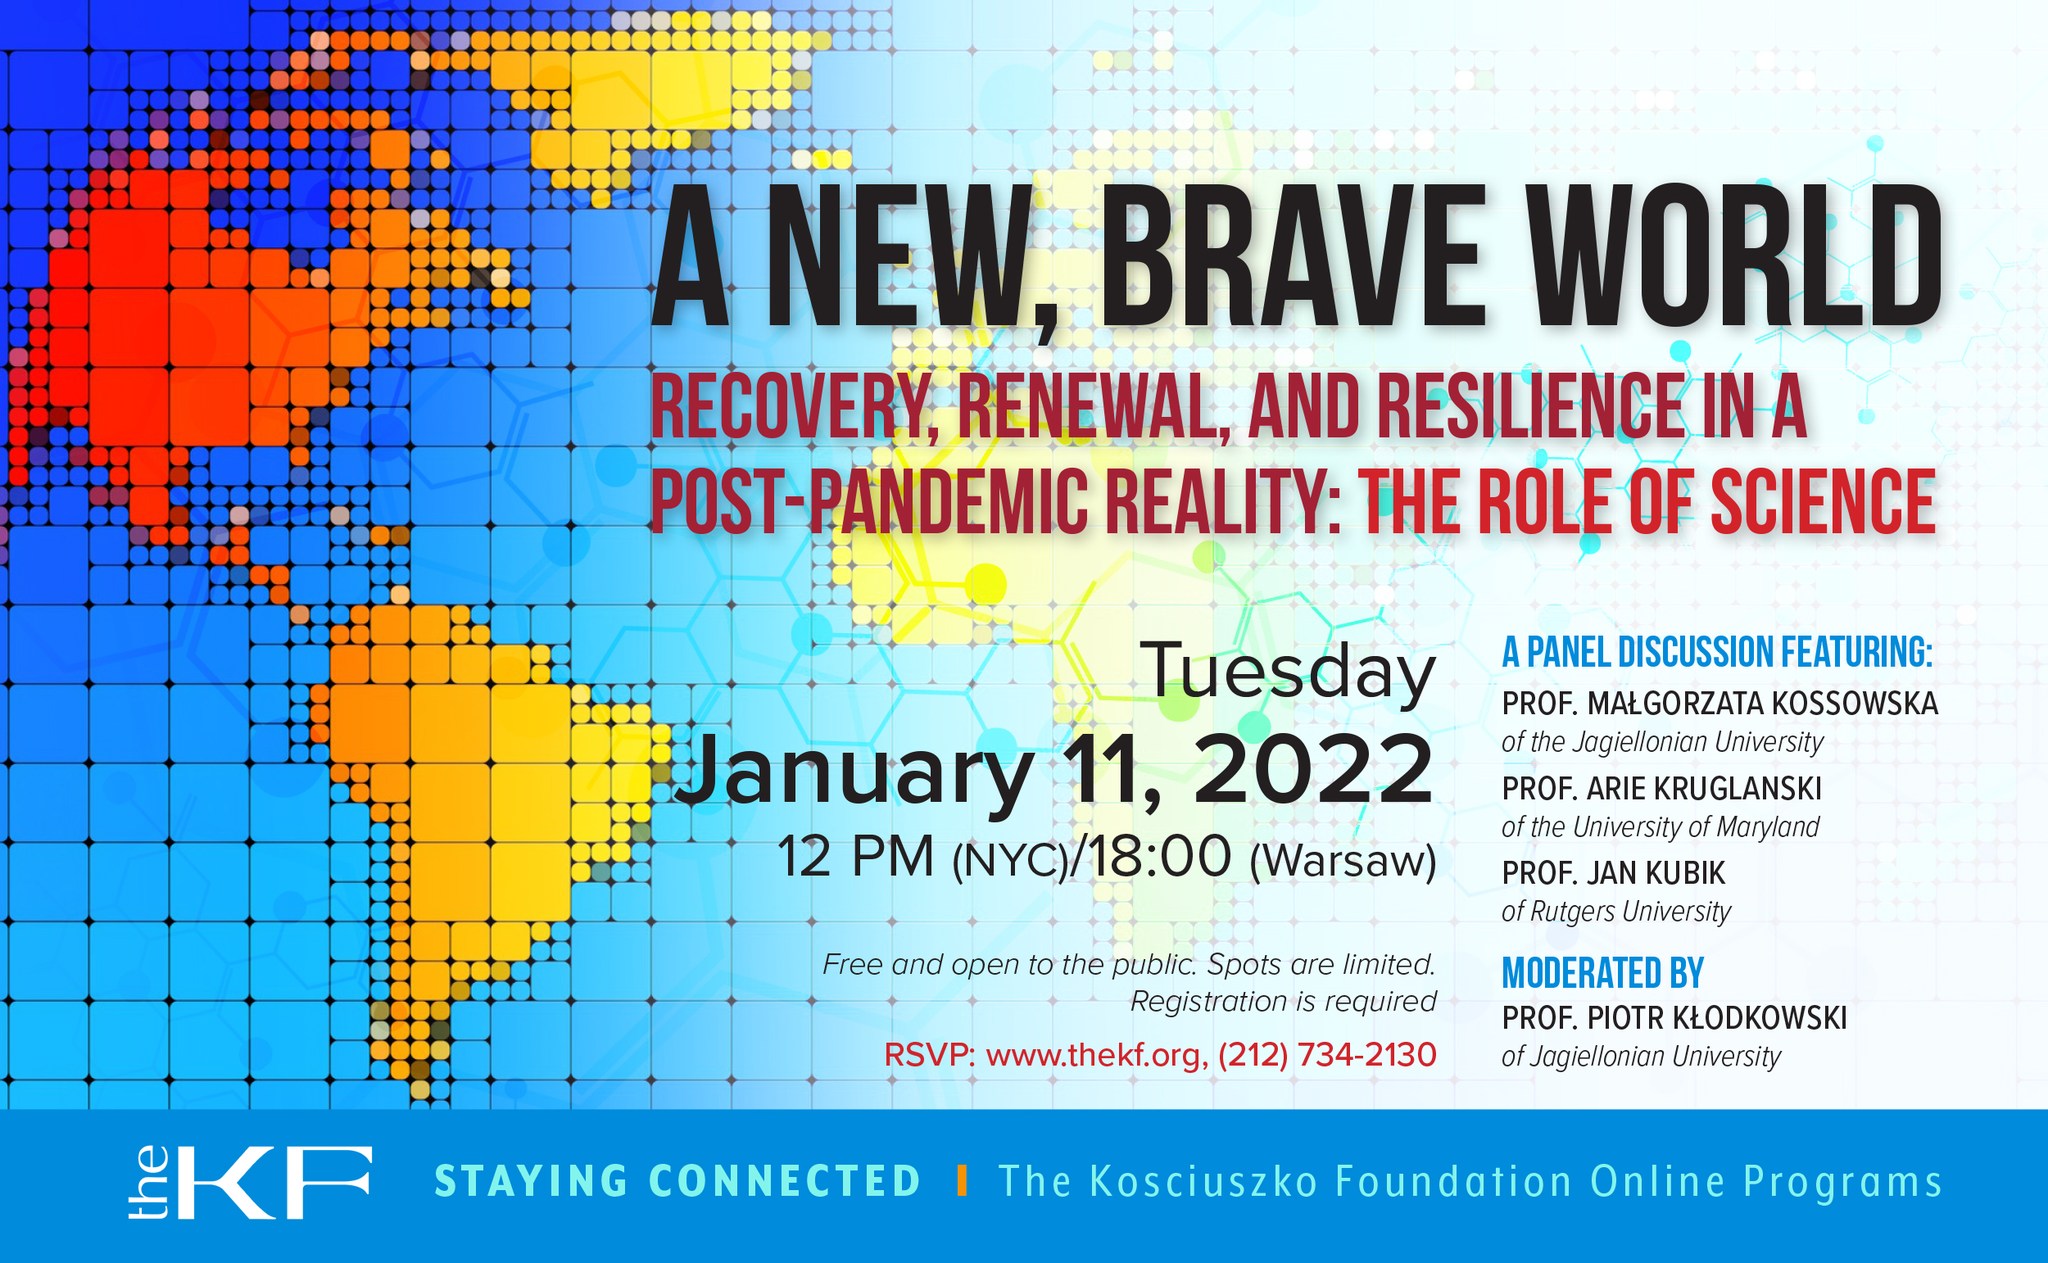 A New, Brave World - Recovery, Renewal and Resilience in the Post-Pandemic Reality - A discussion